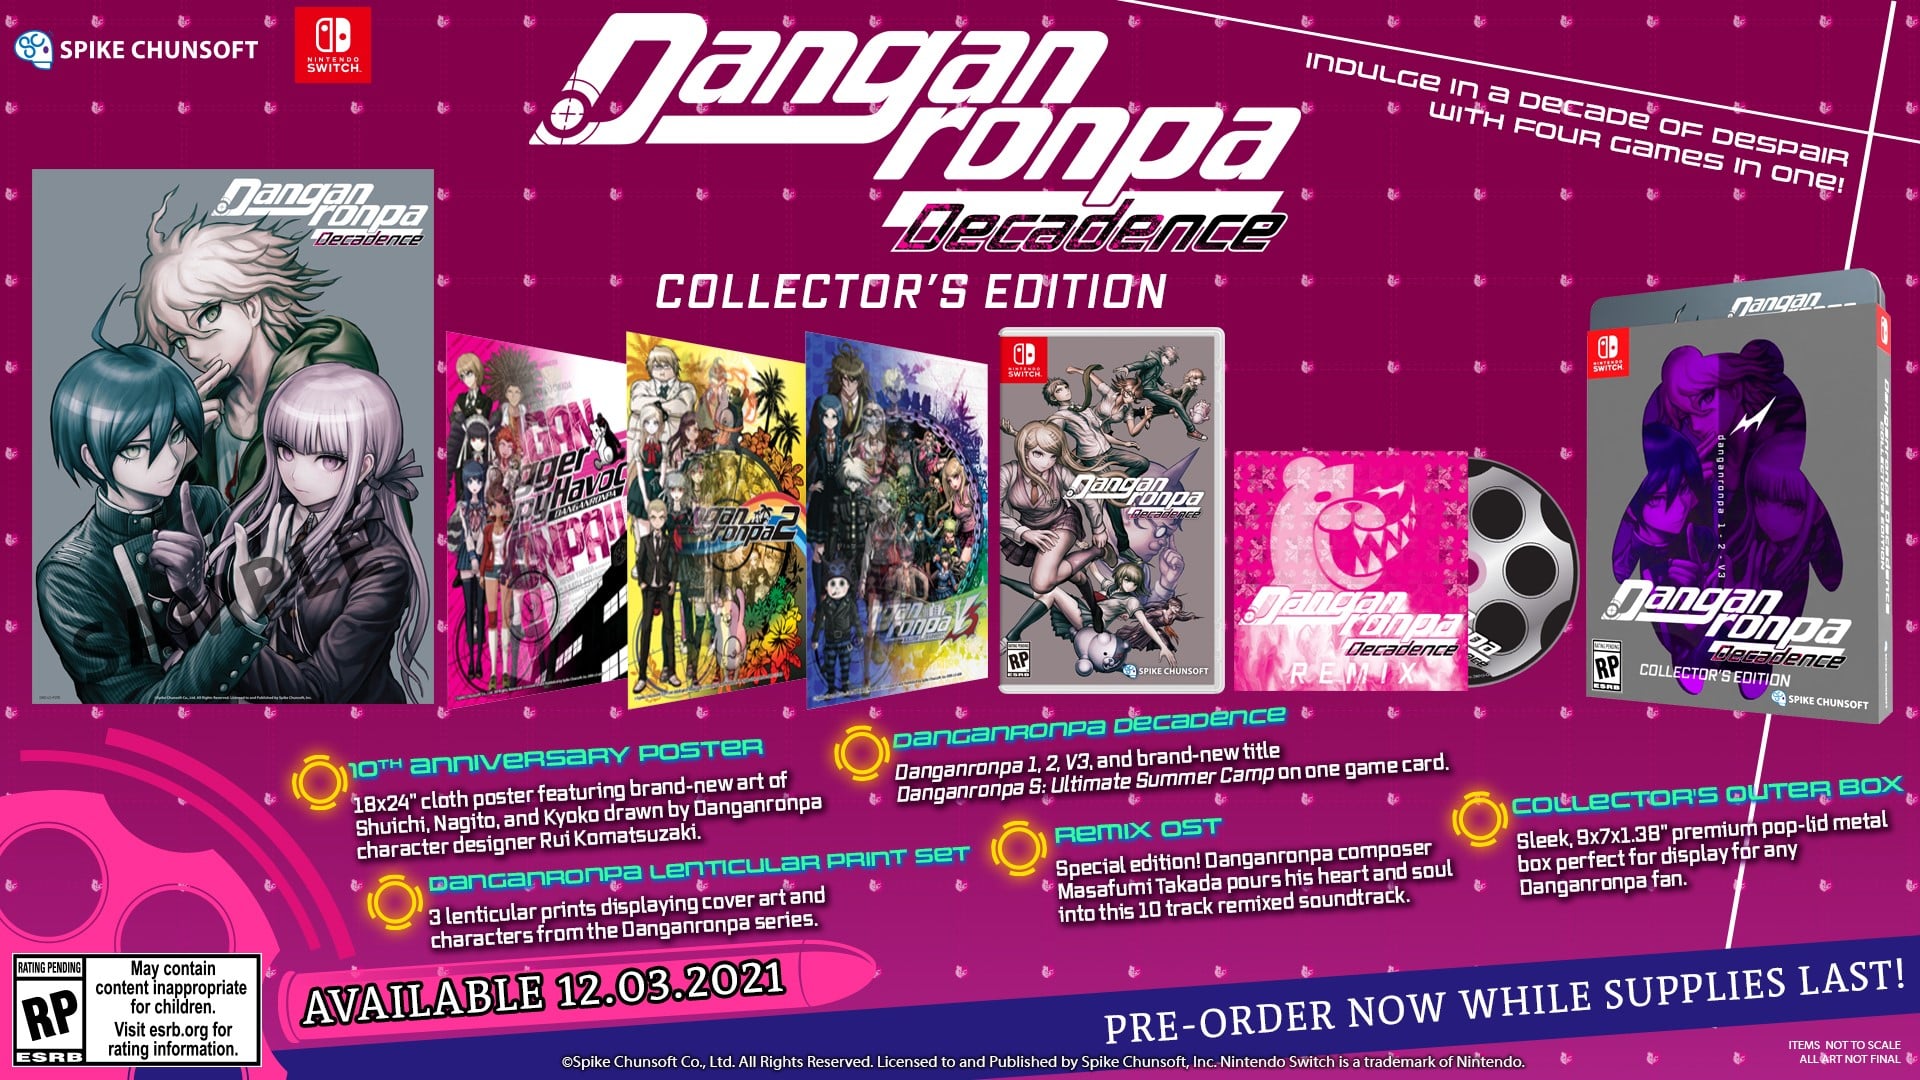 Danganronpa Decadance coming to Switch on December 3